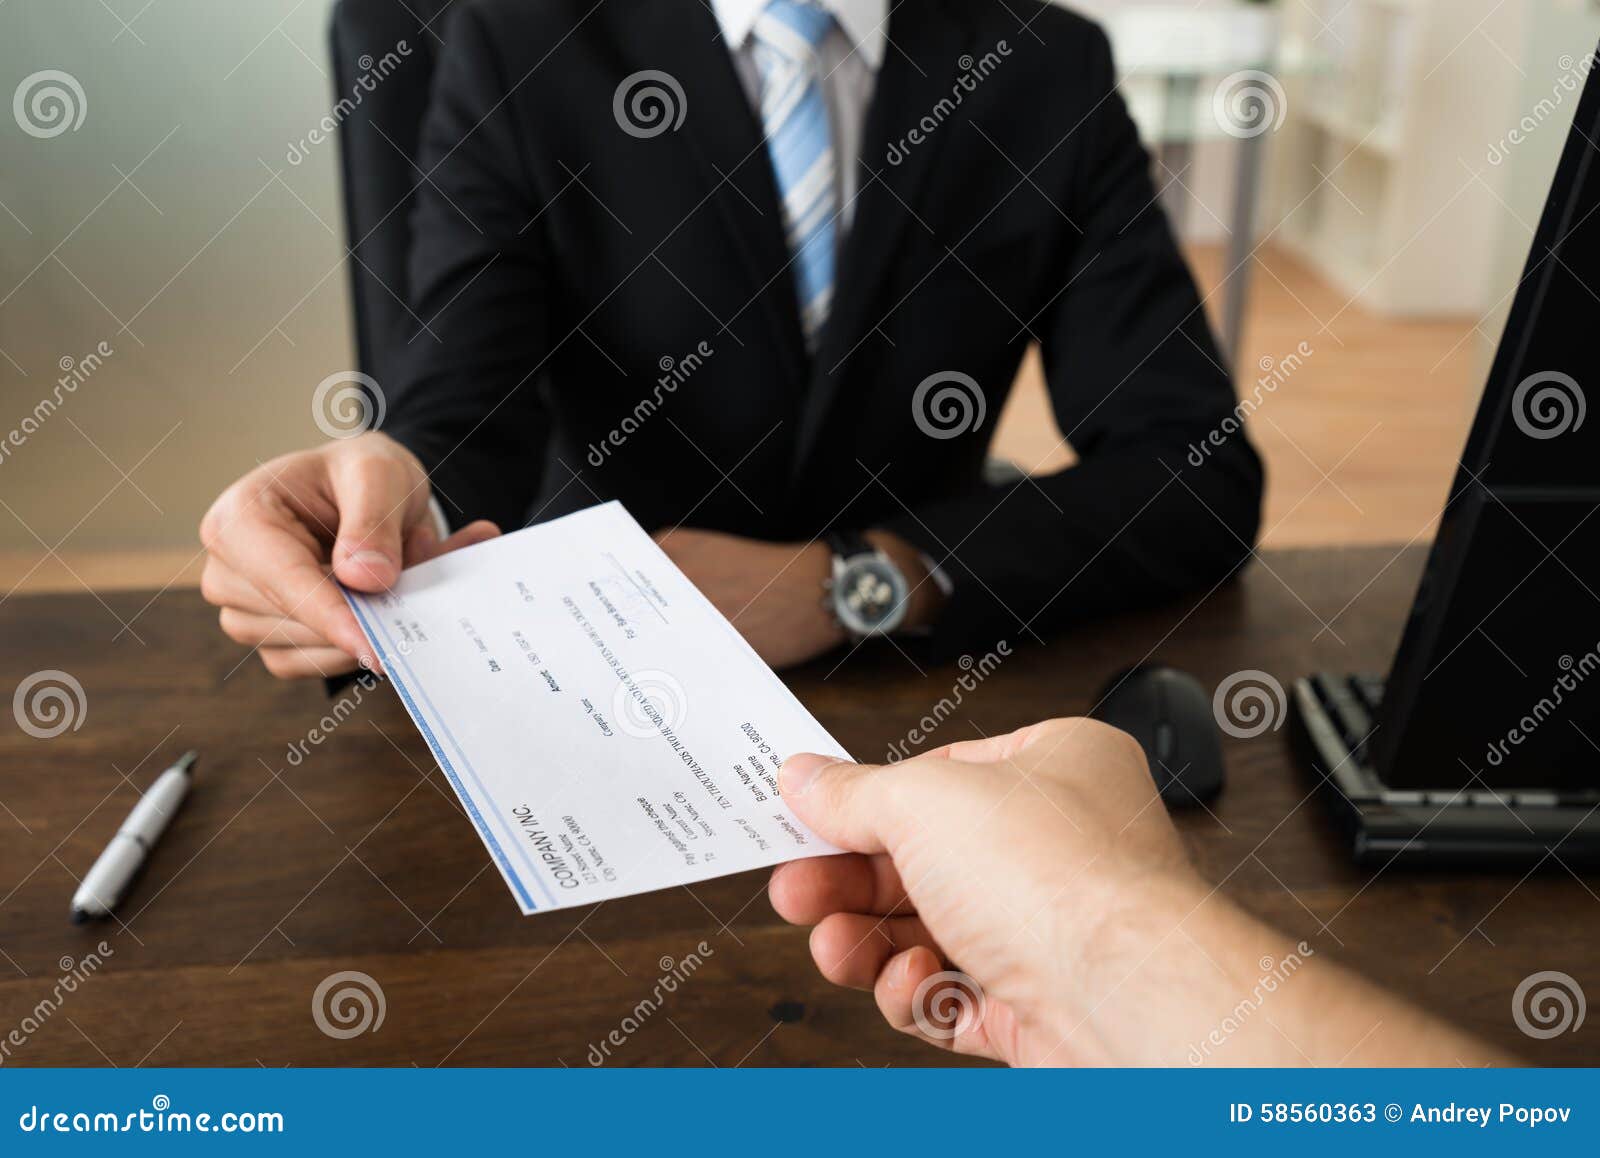 businessman giving cheque to other person